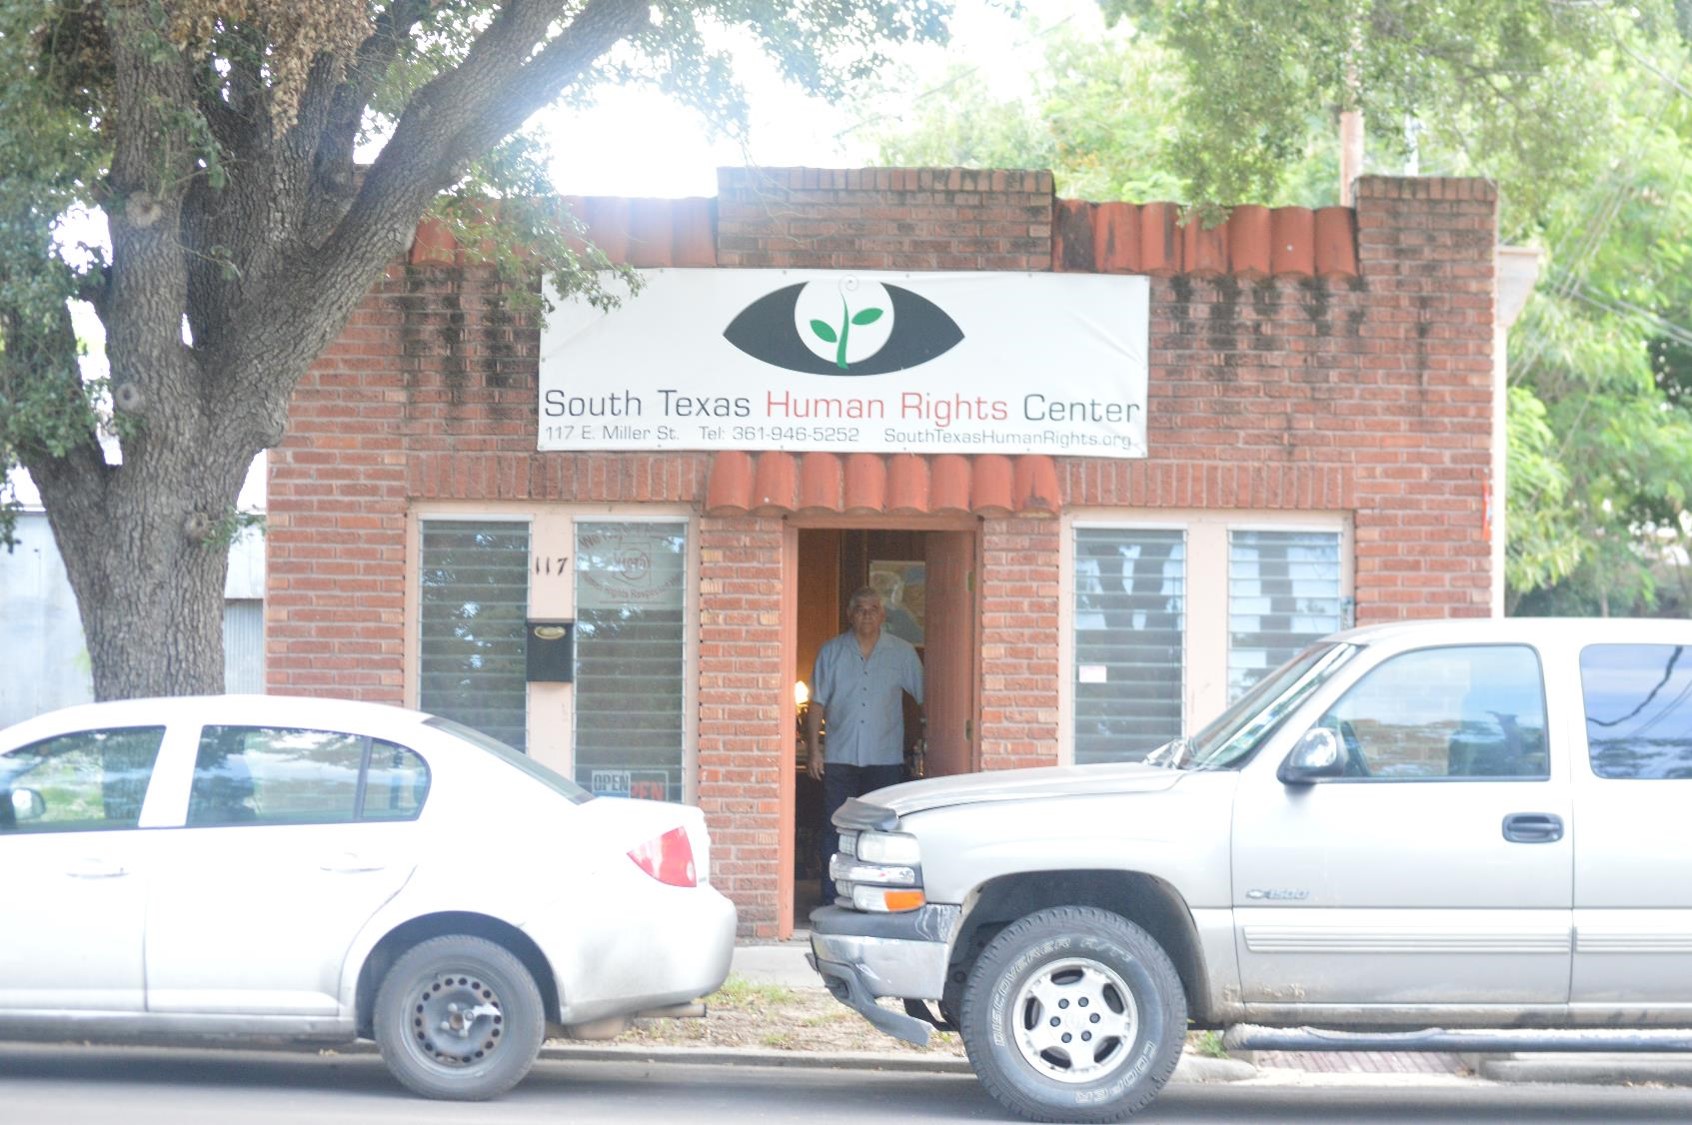 Eddie standing in the doorway of the south texas human rights center